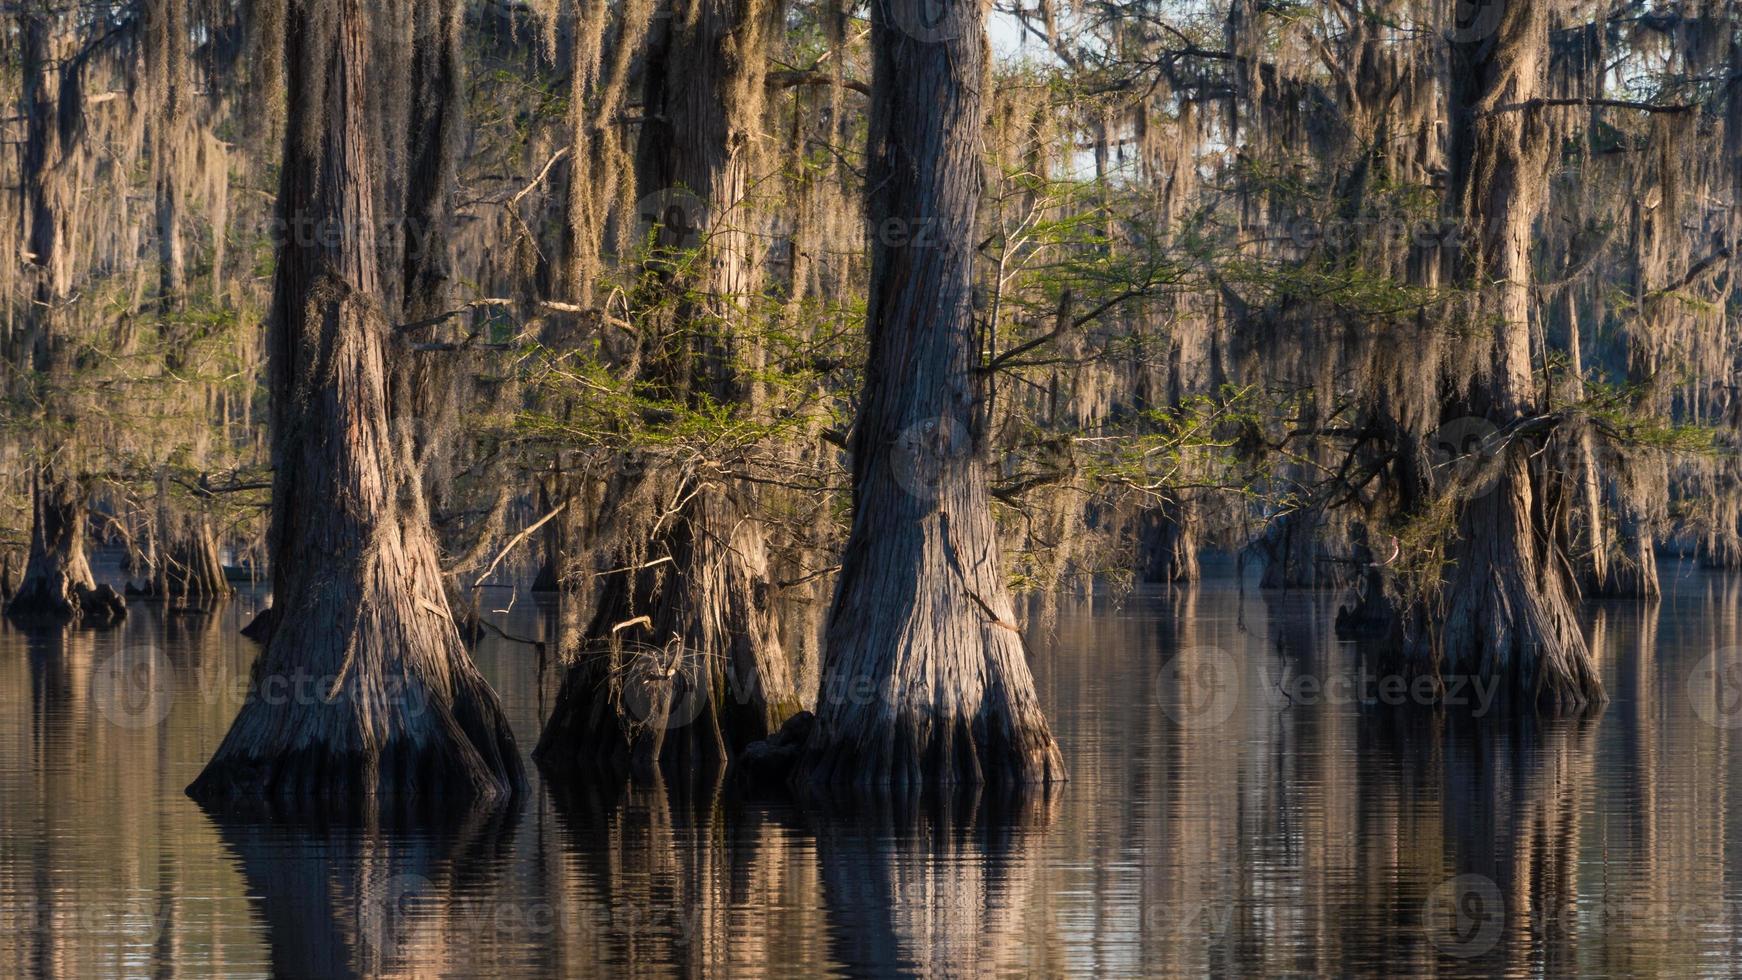 Caddo Lake, with its old trees and endless reflections, is a magical and unique place. photo